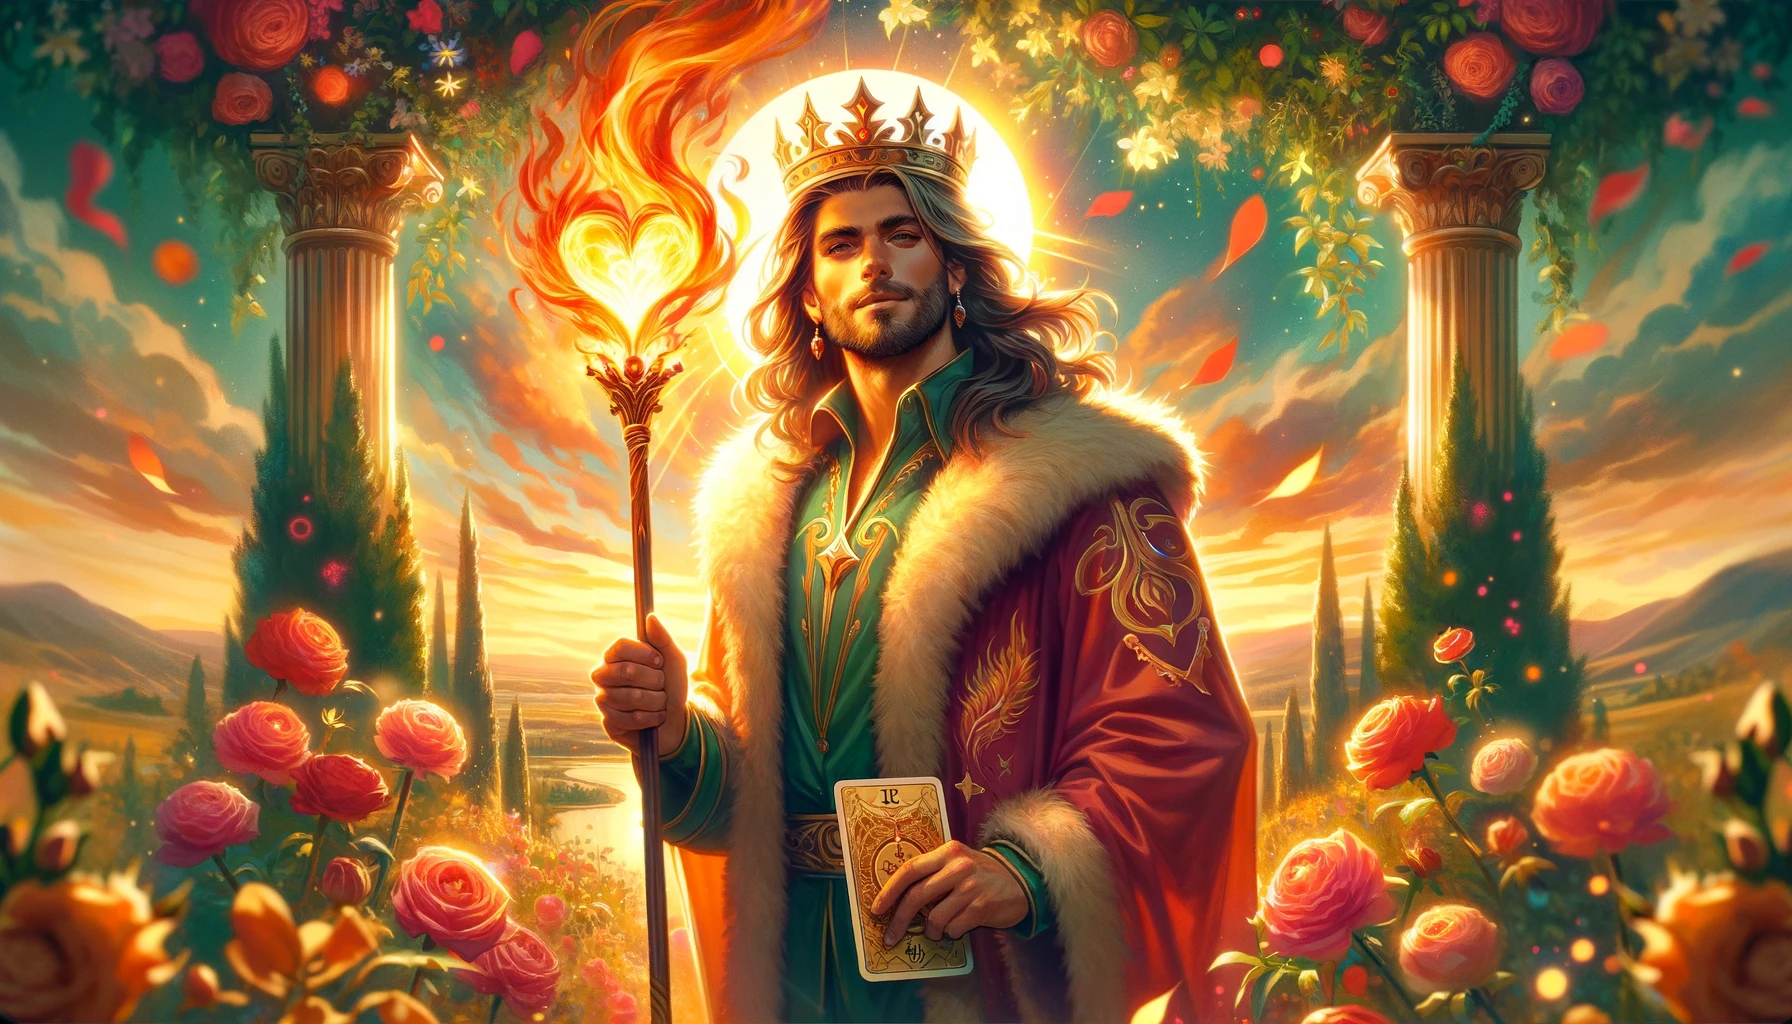 An illustration depicting the King as a dynamic and passionate lover in a romantic and vibrant scene. He stands as a symbol of warmth, energy, and burning intensity in relationships, capturing the essence of a thriving love connection filled with adventure, mutual growth, and exhilarating experiences promised by love with the King of Wands.